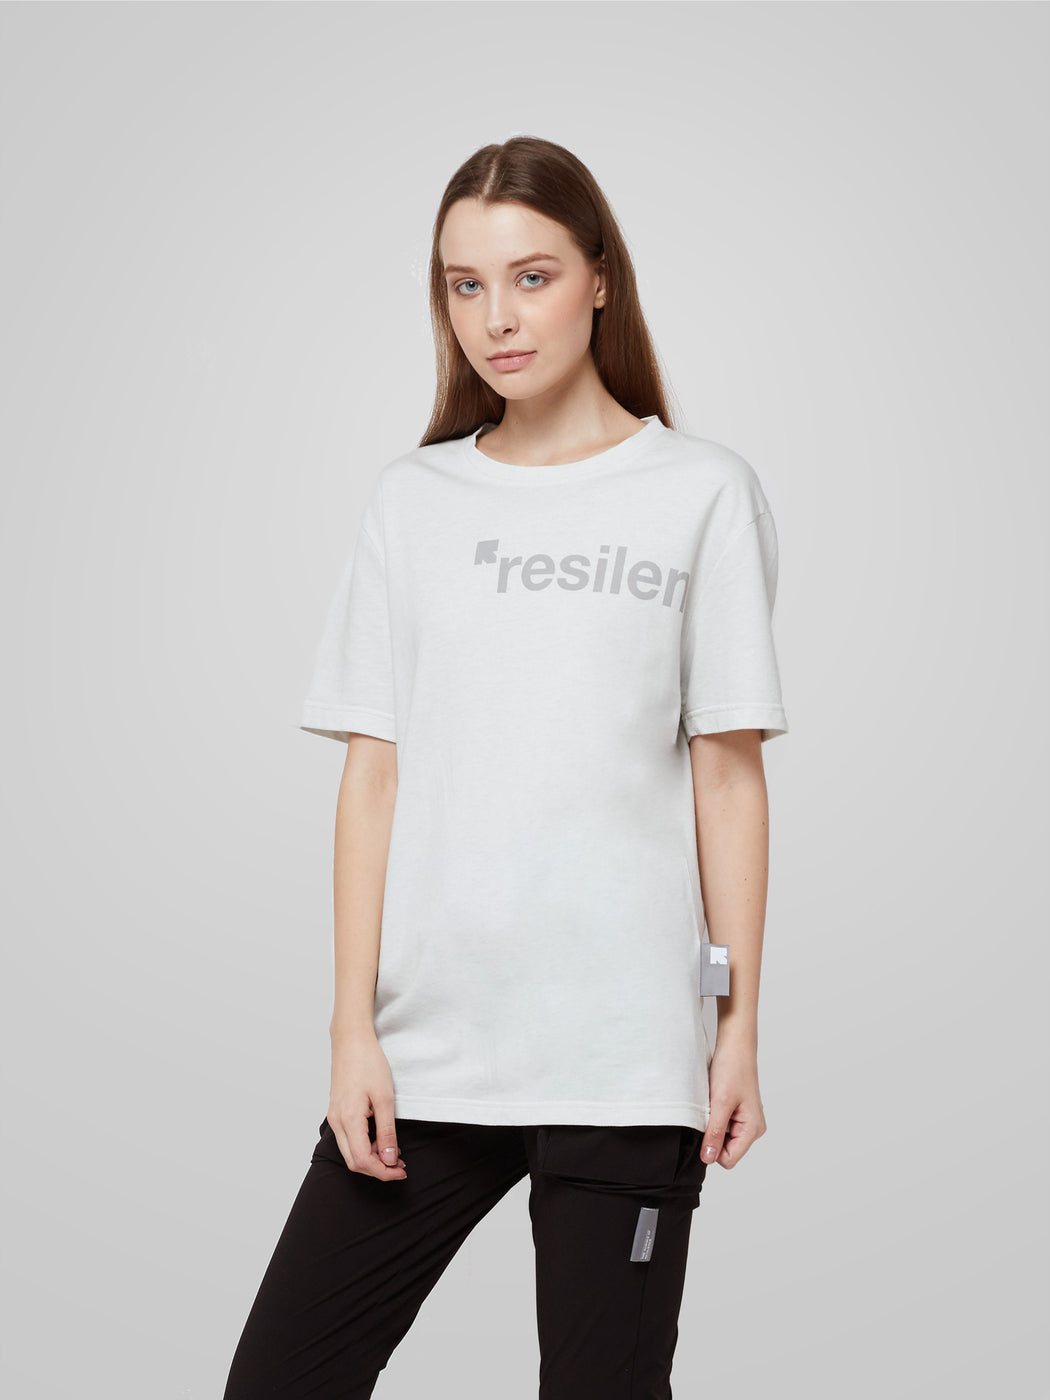 Unisex Science of Resilience White Female T-shirt